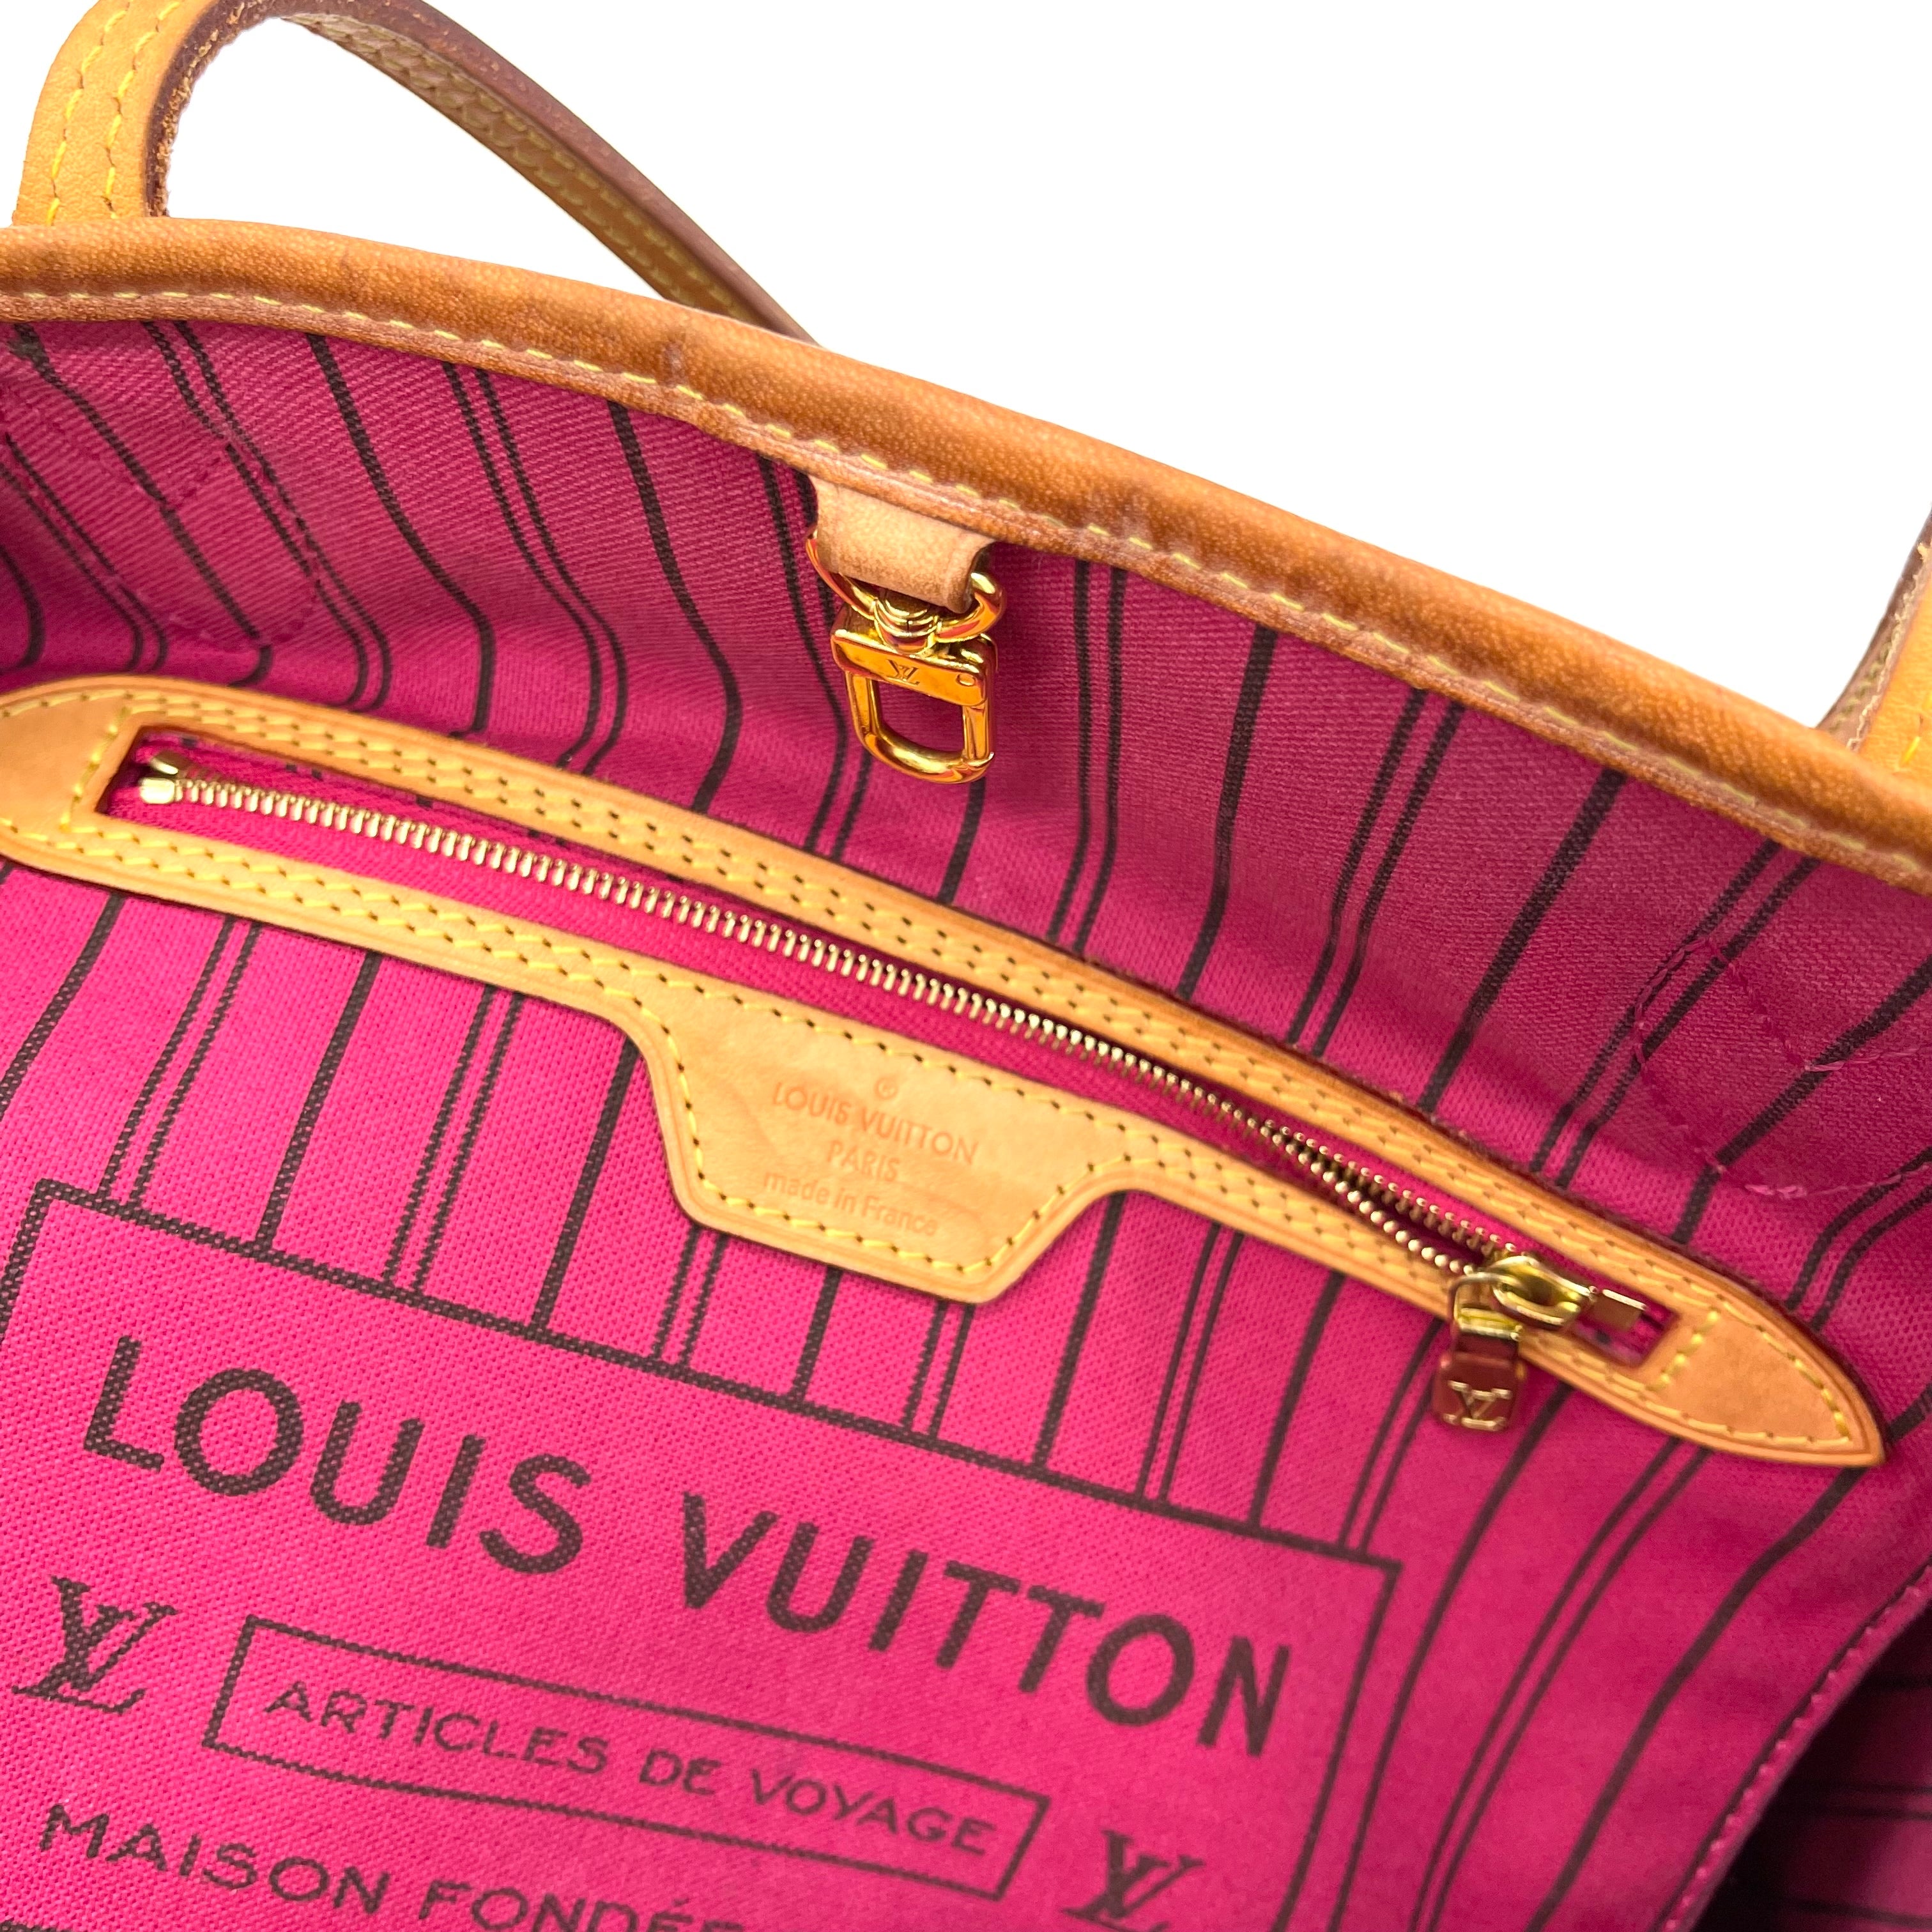 Louis Vuitton - Customized Neverfull MM Shoulder bag in France